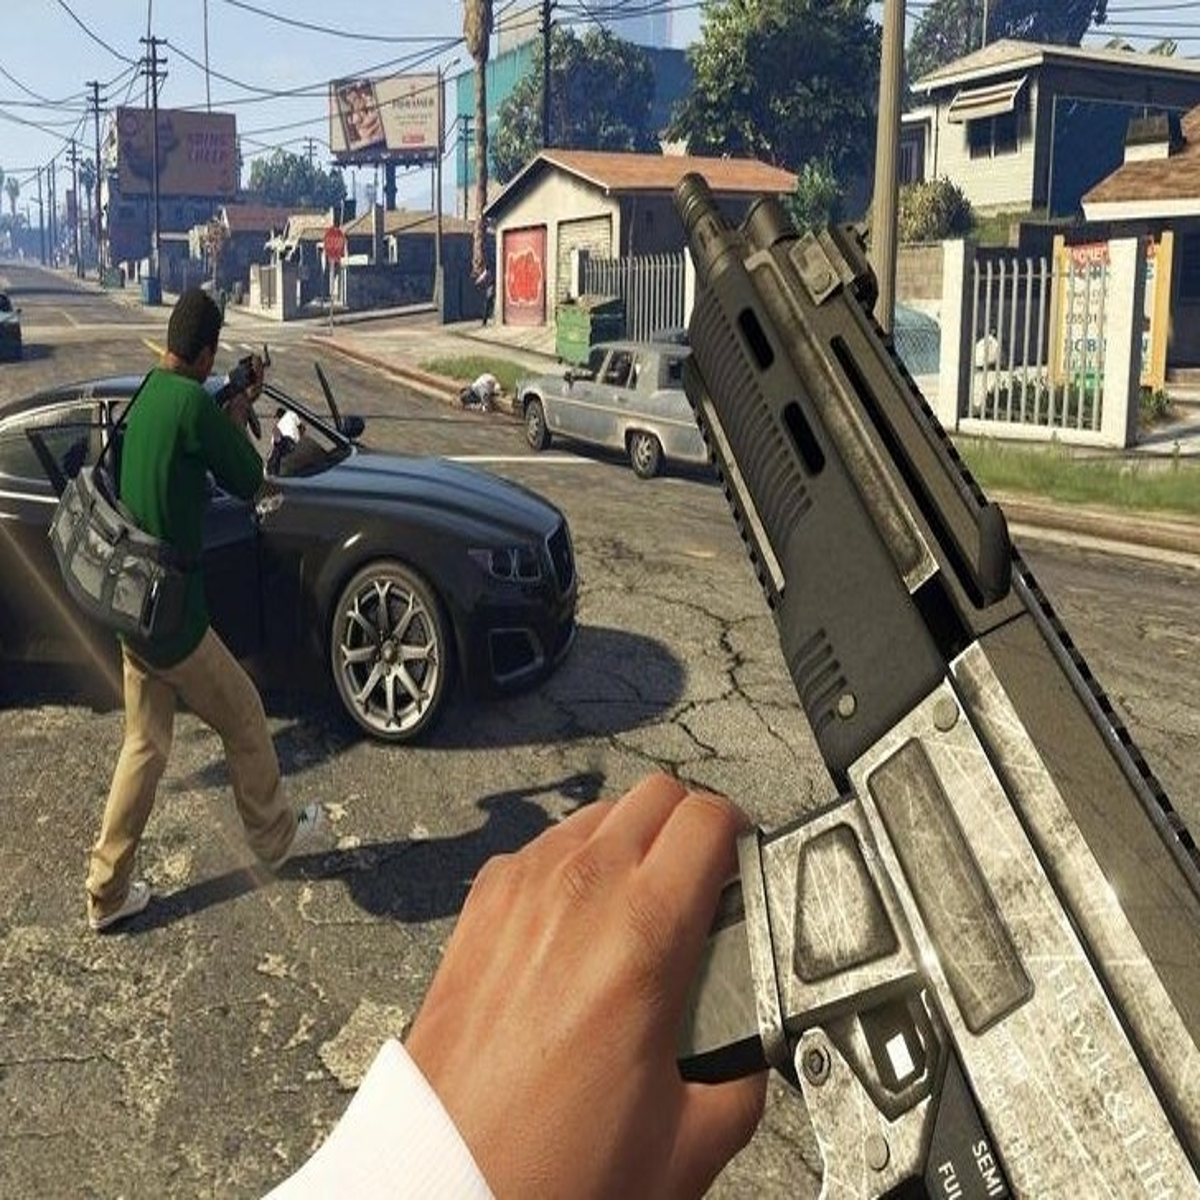 GTA 6 - Grand Theft Auto VI: Official Gameplay Video PC/PS4/XONE